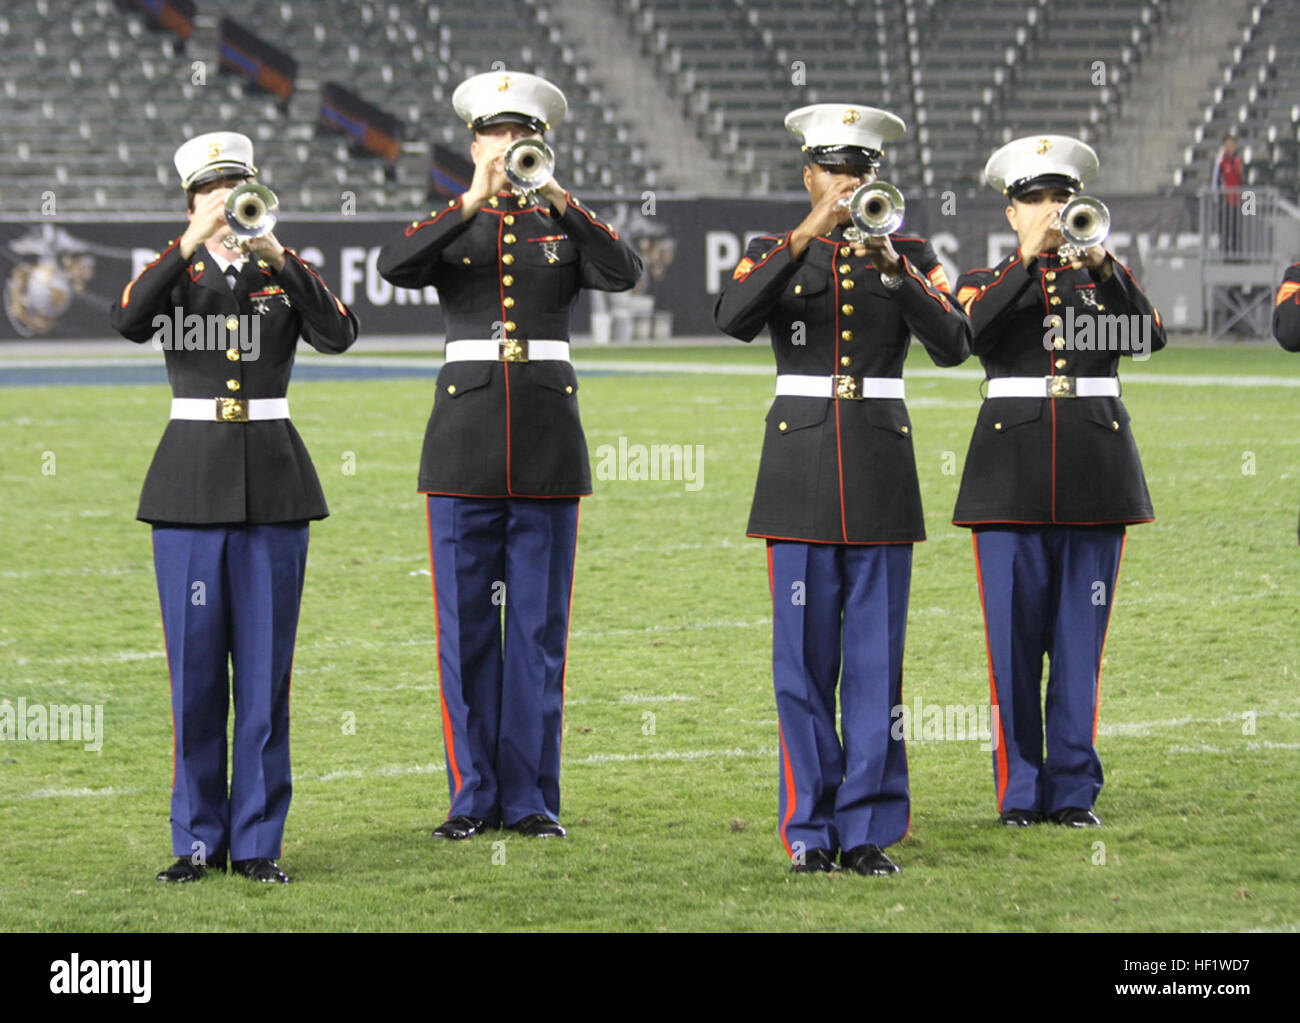 Marines with Marine Band San Diego play the National Anthem during the Semper Fidelis All-American Bowl at The StubHub Center in Carson, Calif., Jan. 5, 2014. The Semper Fidelis Football Program brought together over 90 of the best high-school football players in an East versus West game and is an opportunity for the Marine Corps to connect on a personal and local level with players and influencers, demonstrates commitment to developing quality citizens, and reinforces how core values of honor, courage and commitment relate to success on and off the field. (Official U.S. Marine Corps photo by  Stock Photo